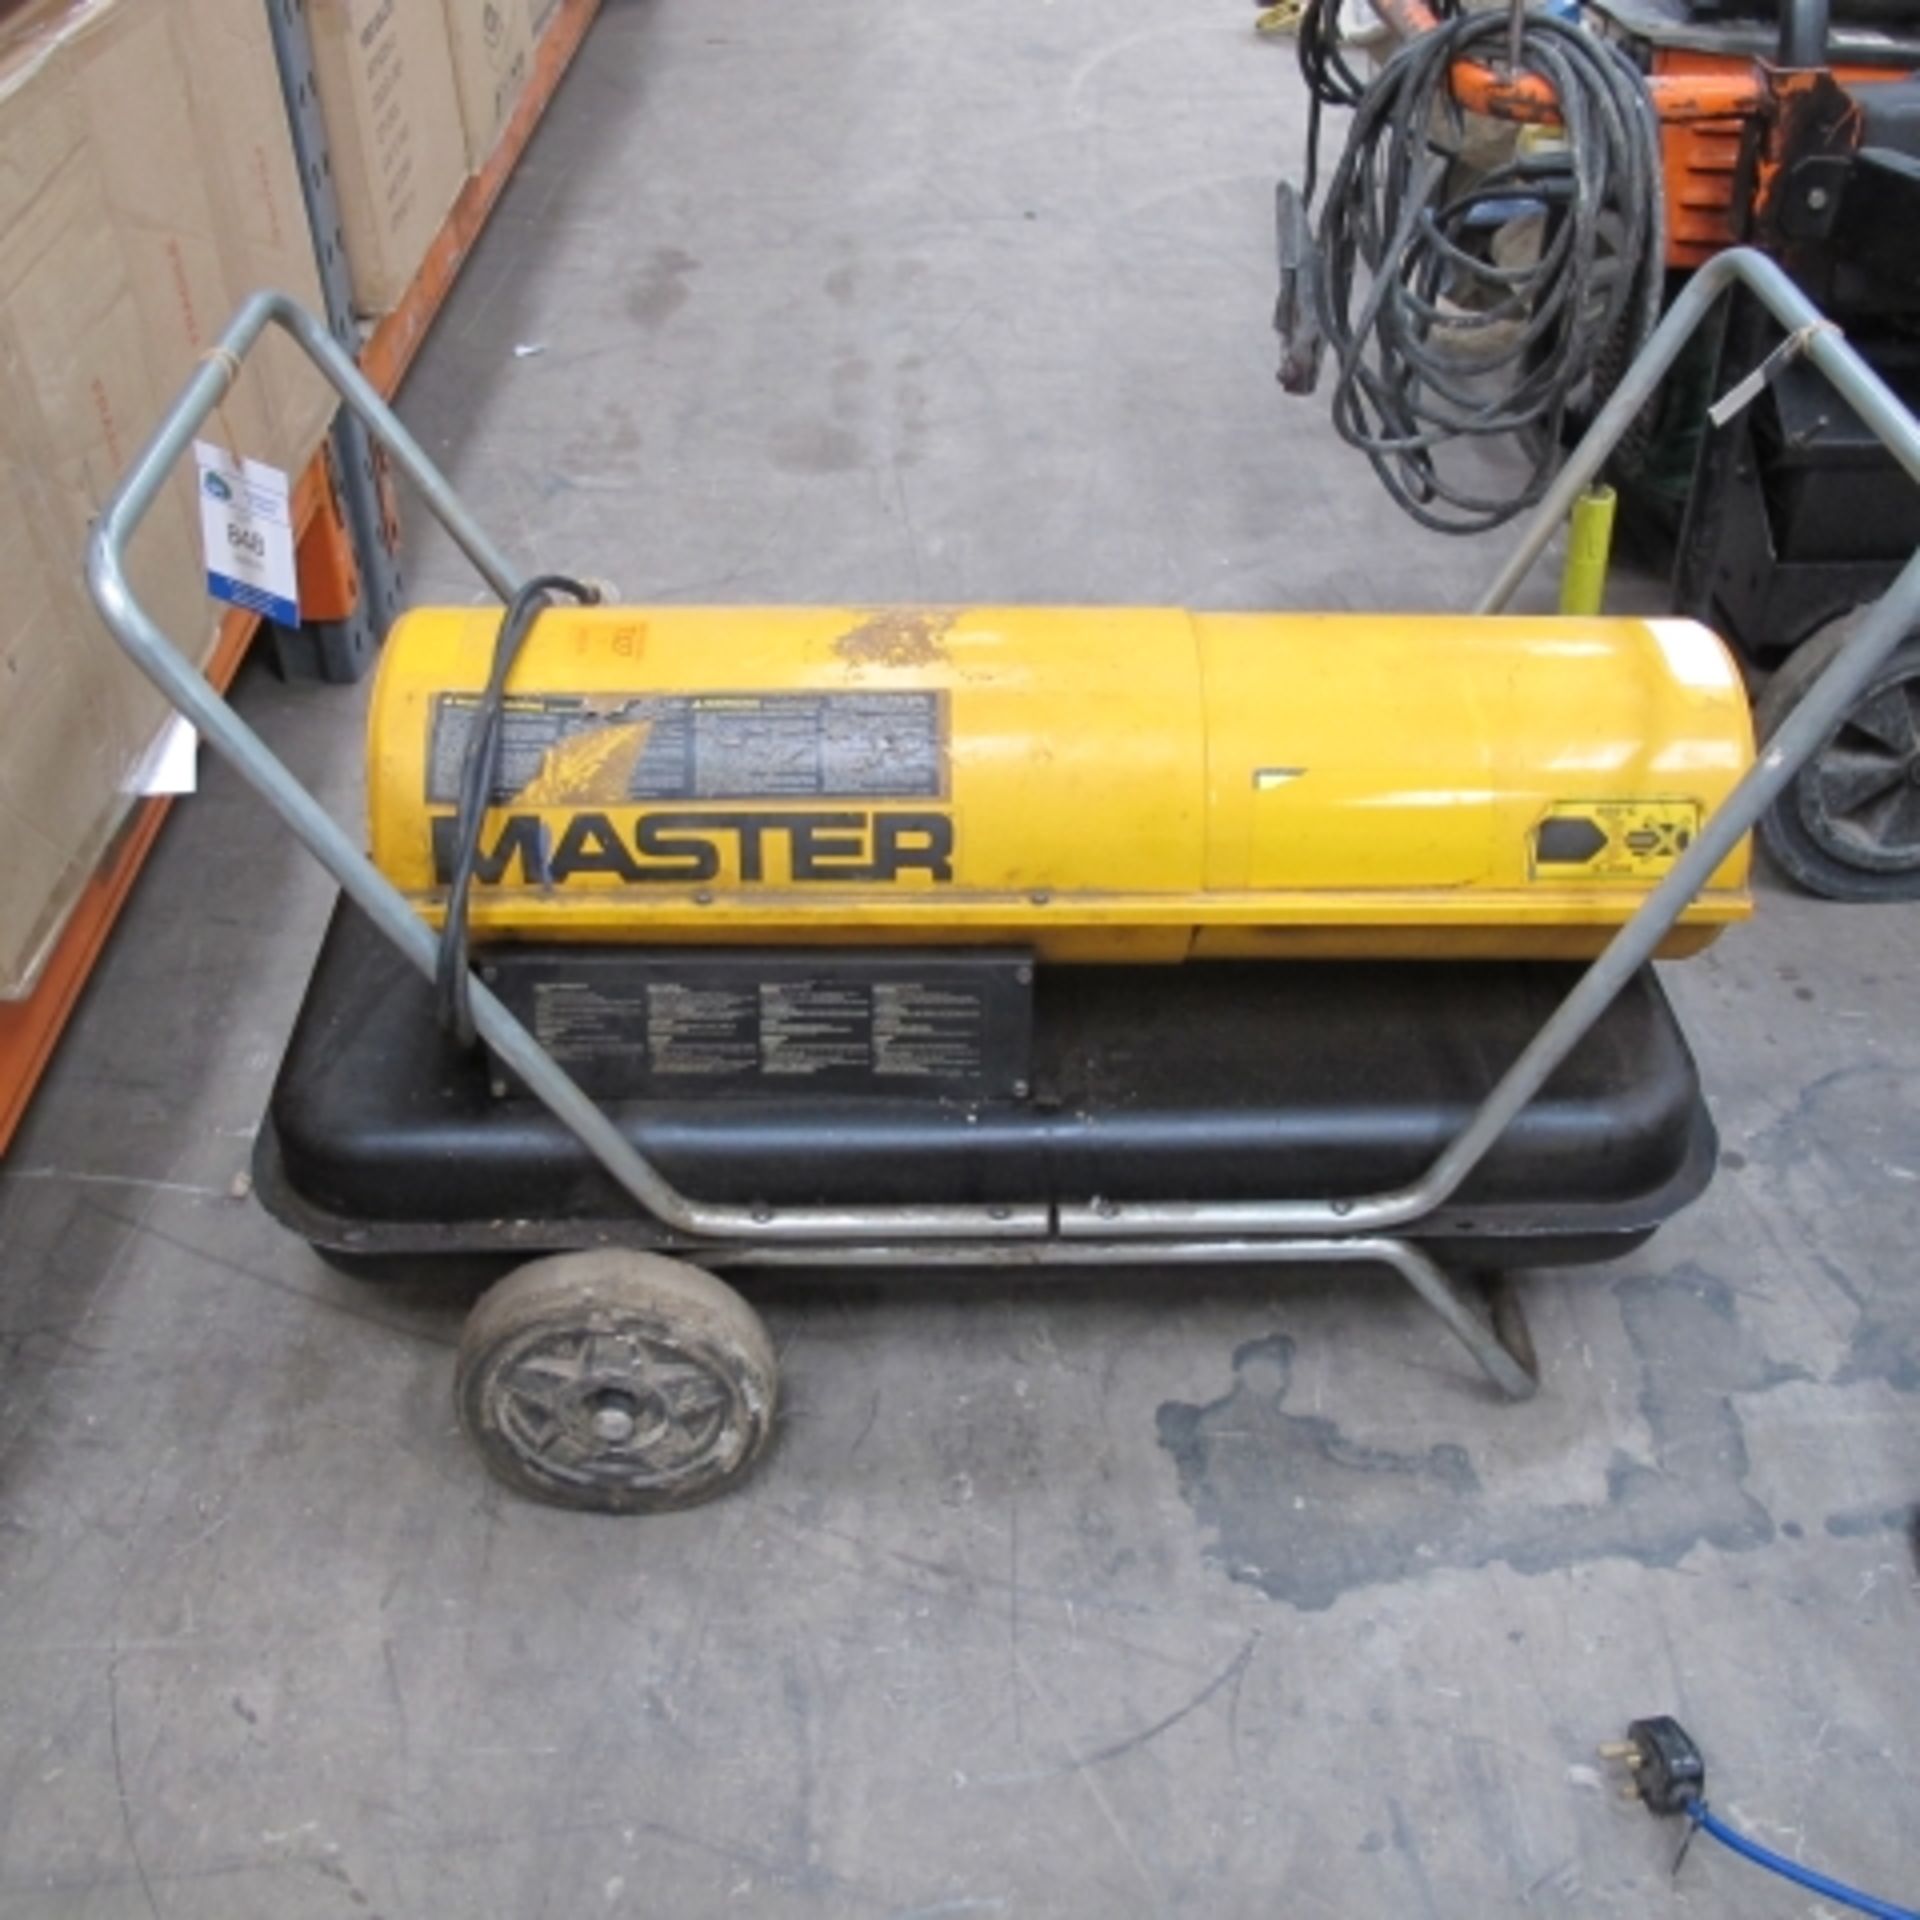 * A Master Diesel Space Heater.  110V.